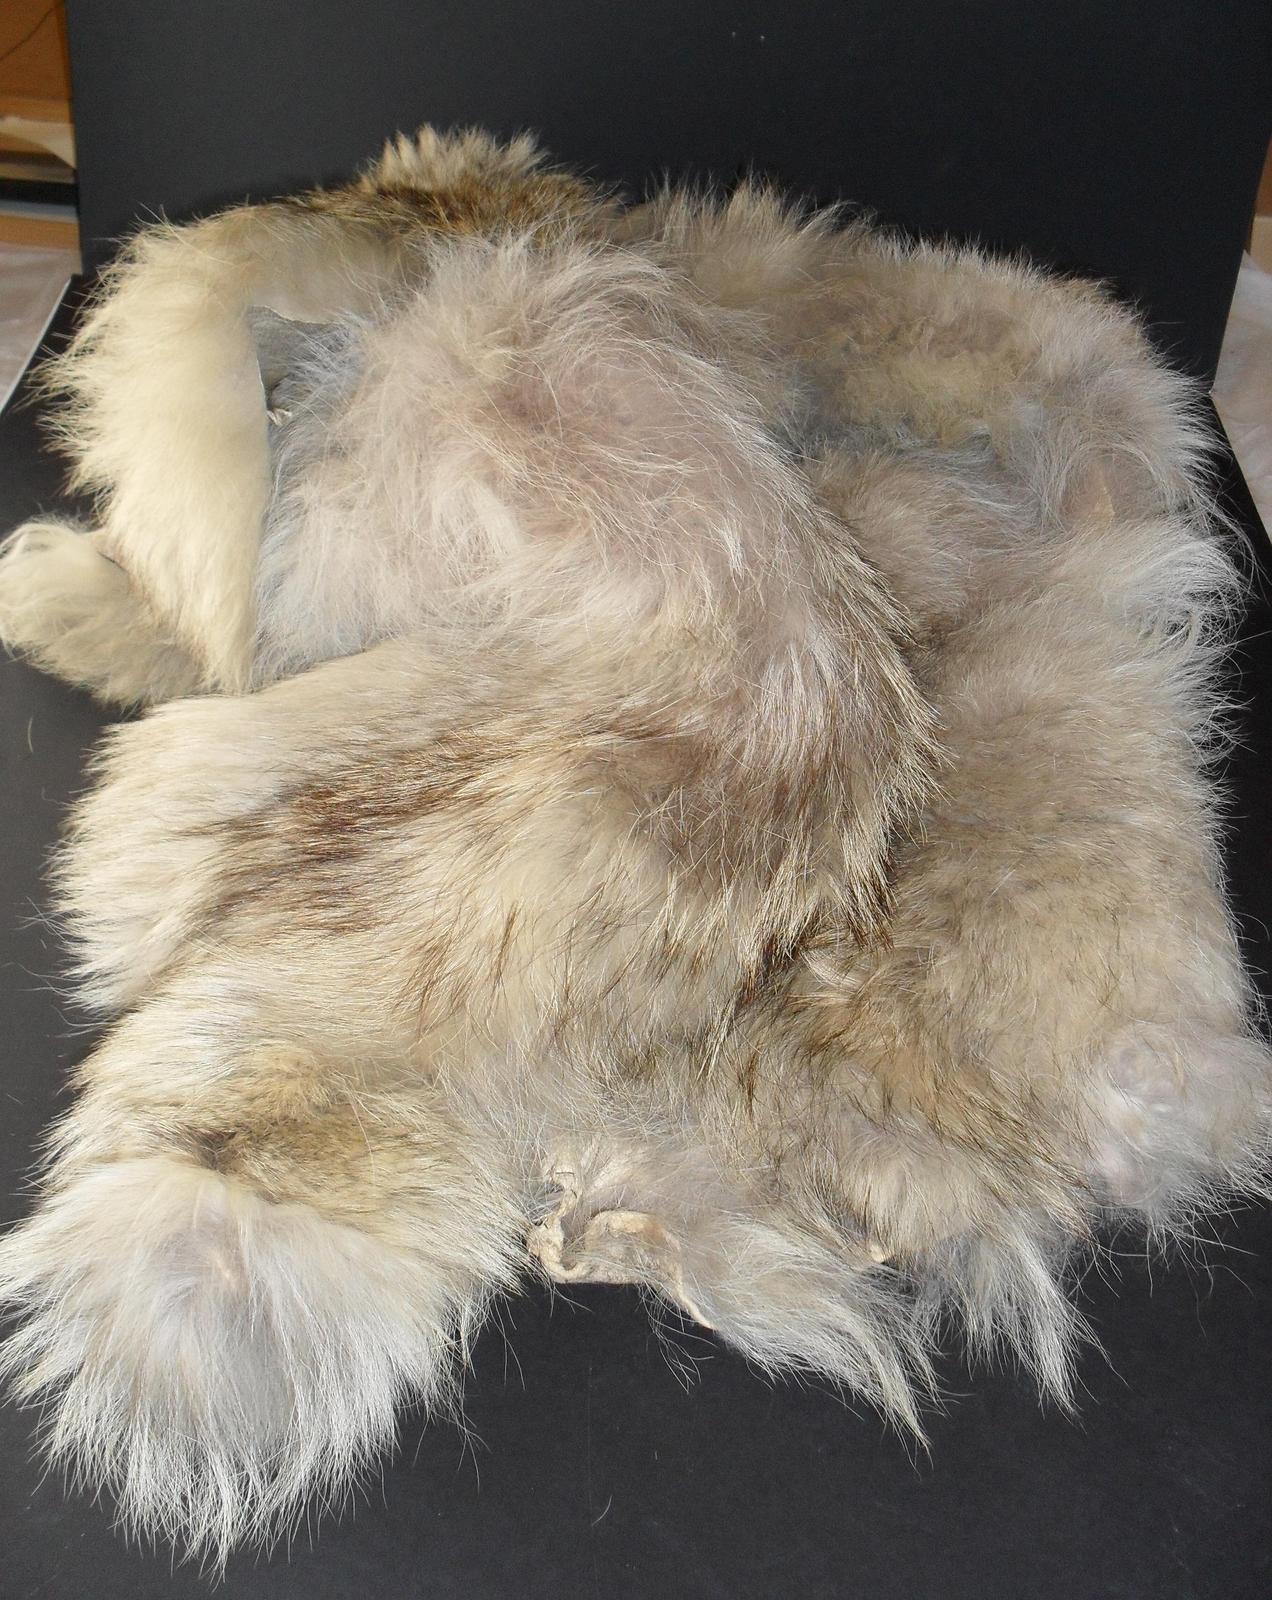 Fur pelt possibly wolf or huskie in Maritime at Dundee Heritage Trust